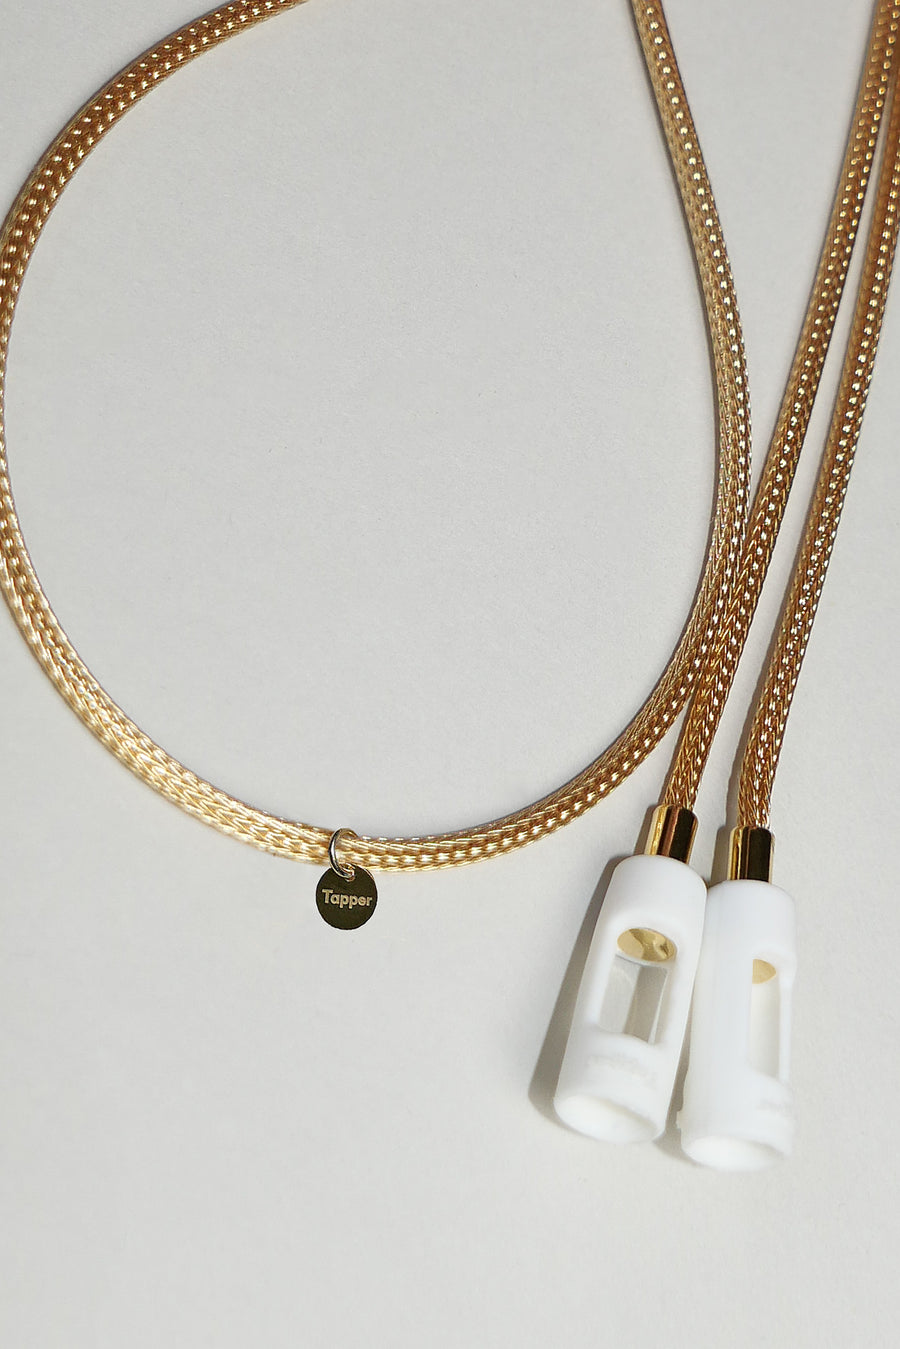 Tapper's solid 18K gold original mesh chain jewelry necklace protects your Apple AirPods & AirPods Pro. Handcrafted in real 18K gold, the exclusive, elevated & accessible mesh chain jewellery snaps the AirPods around your neck. Lost your AirPods? Magnetic lock for convenient and hassle-free safekeeping around your neck. The next must-have & luxe AirPods accessory crafted for ultimate luxury. Compatible with AirPods & AirPods Pro. Designed and handcrafted in Sweden by Tapper. Free Shipping at gettapper.com